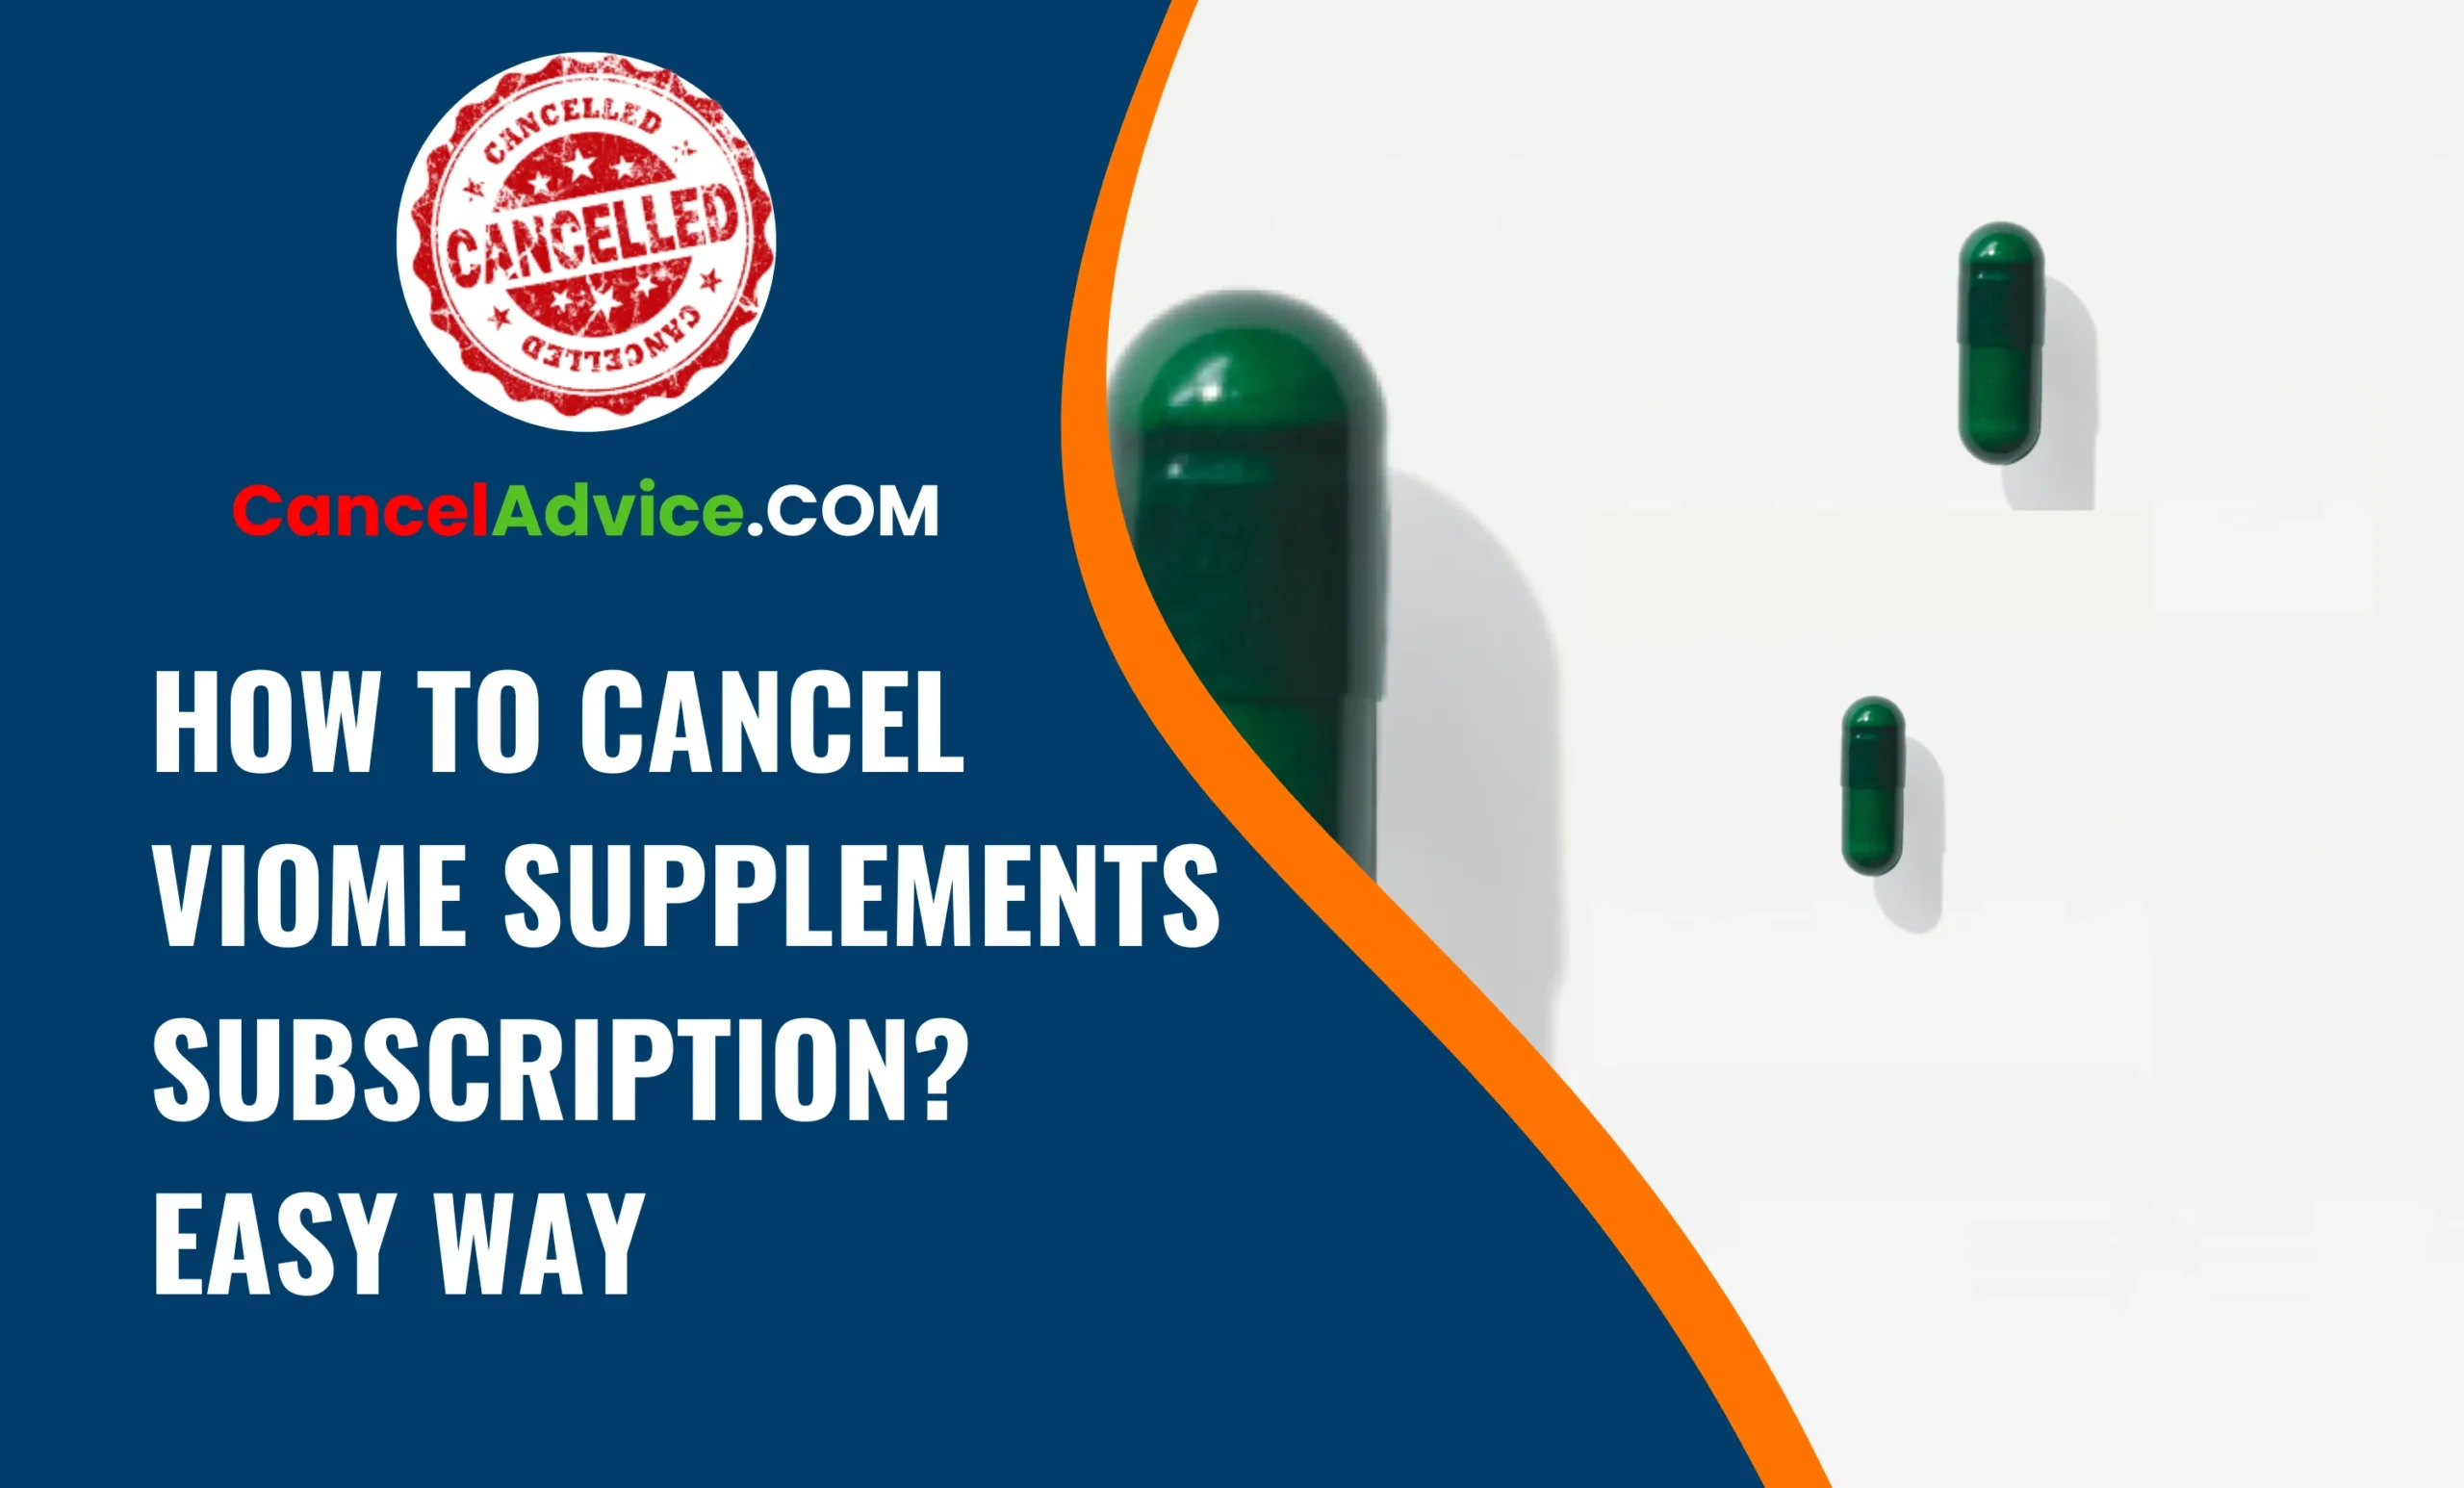 How To Cancel Viome Supplements Subscription